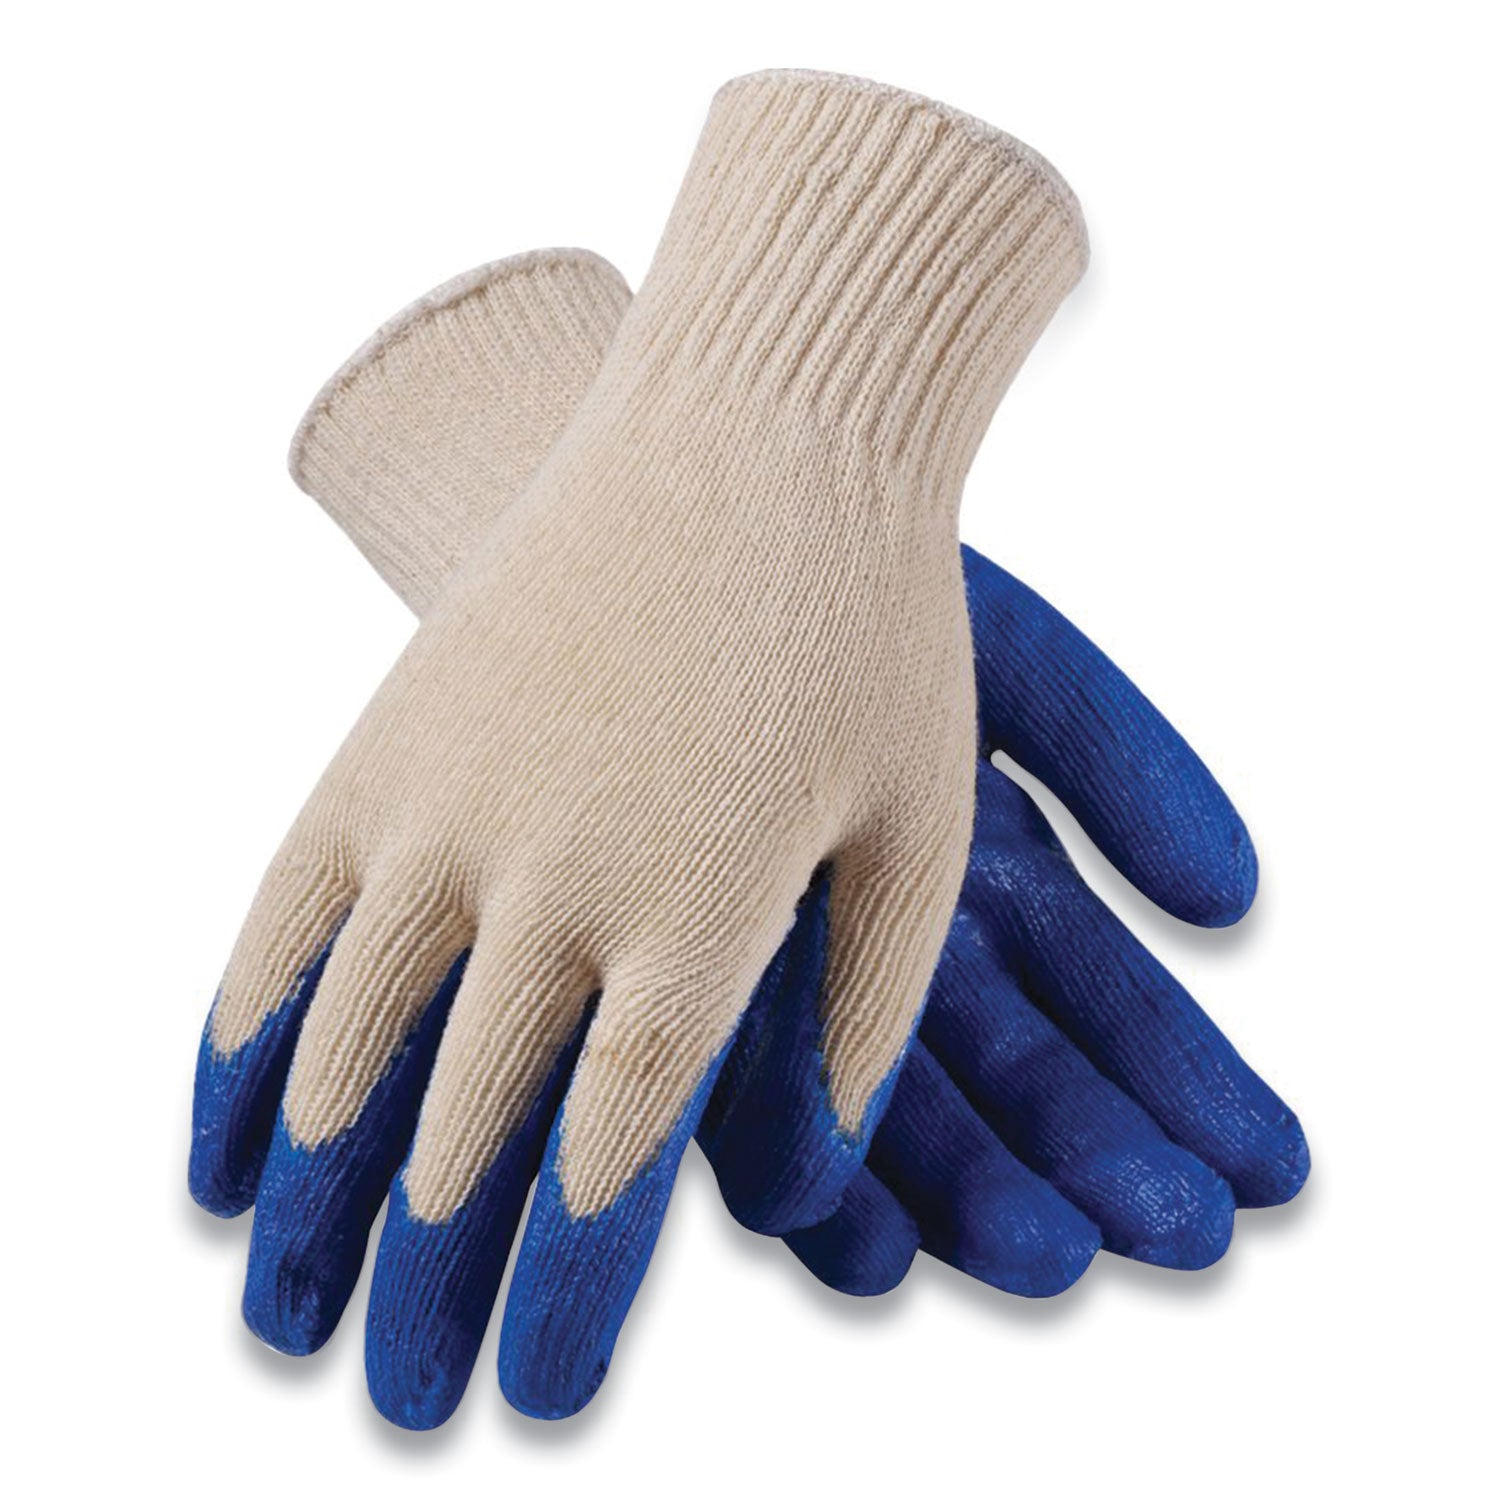 seamless-knit-cotton-polyester-gloves-regular-grade-large-natural-blue-12-pairs_pid39c122l - 1